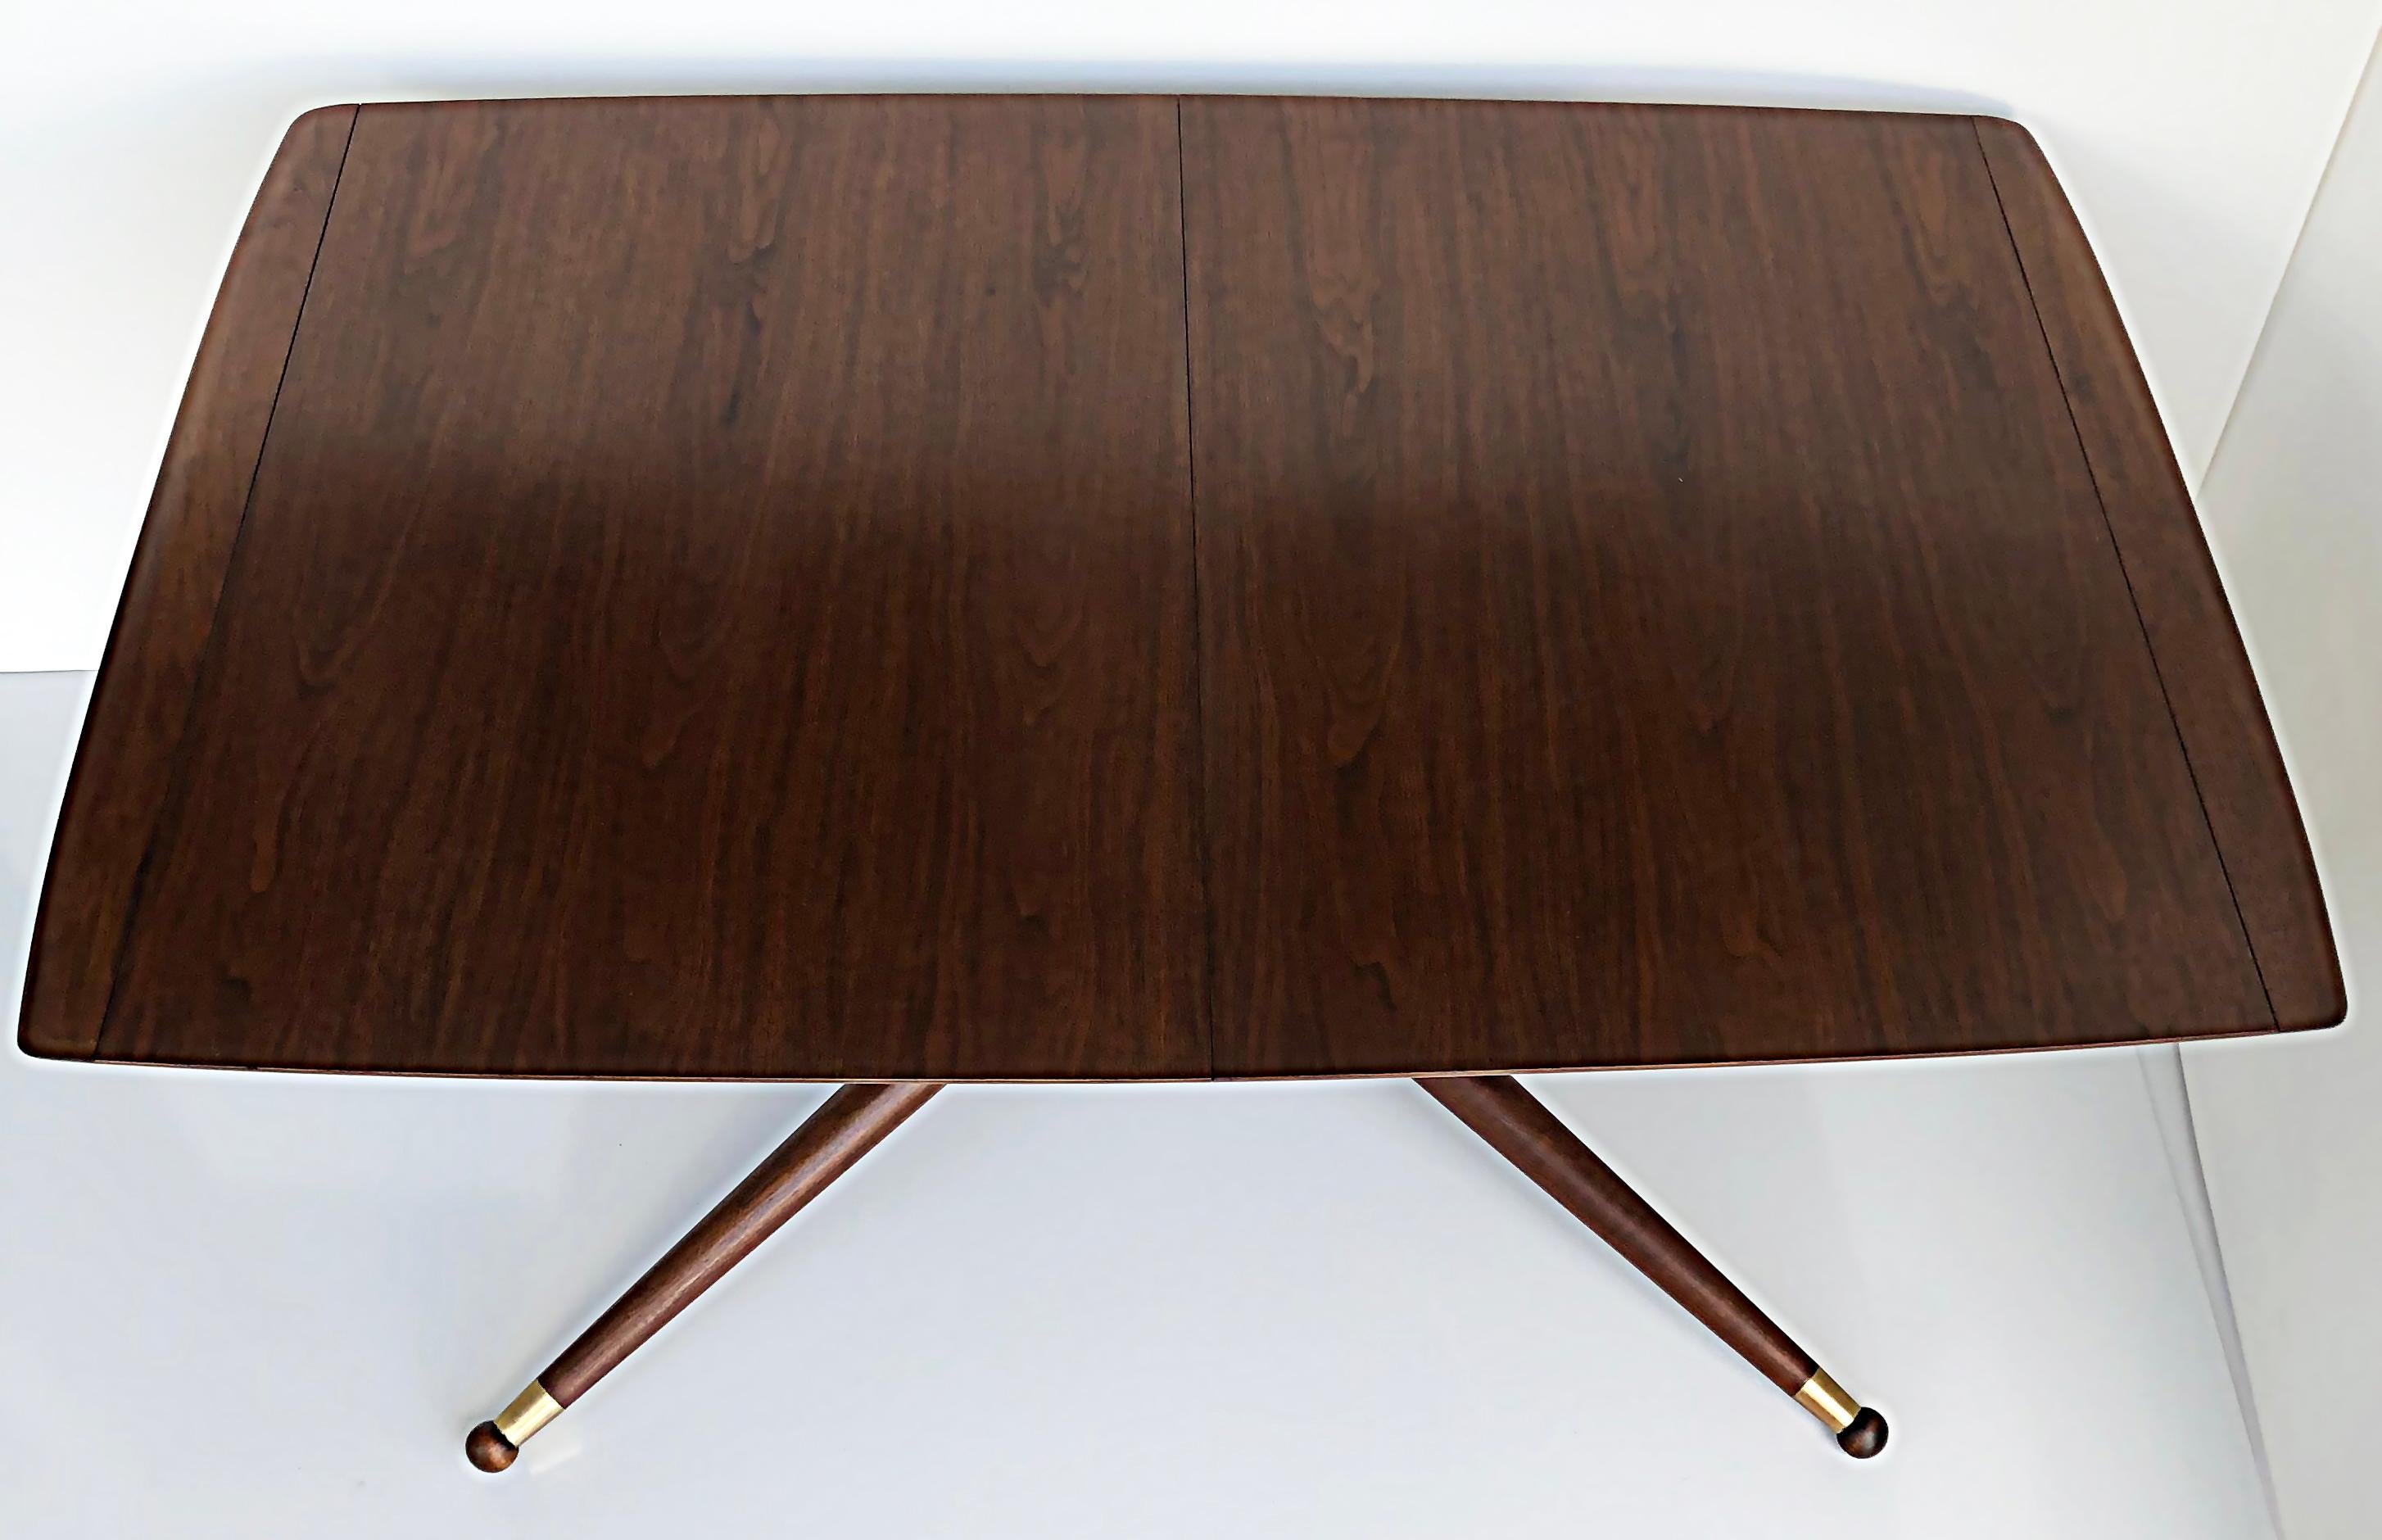 20th Century American Mid-Century Modernist Expandable Dining Table with Two Wood Leaves For Sale